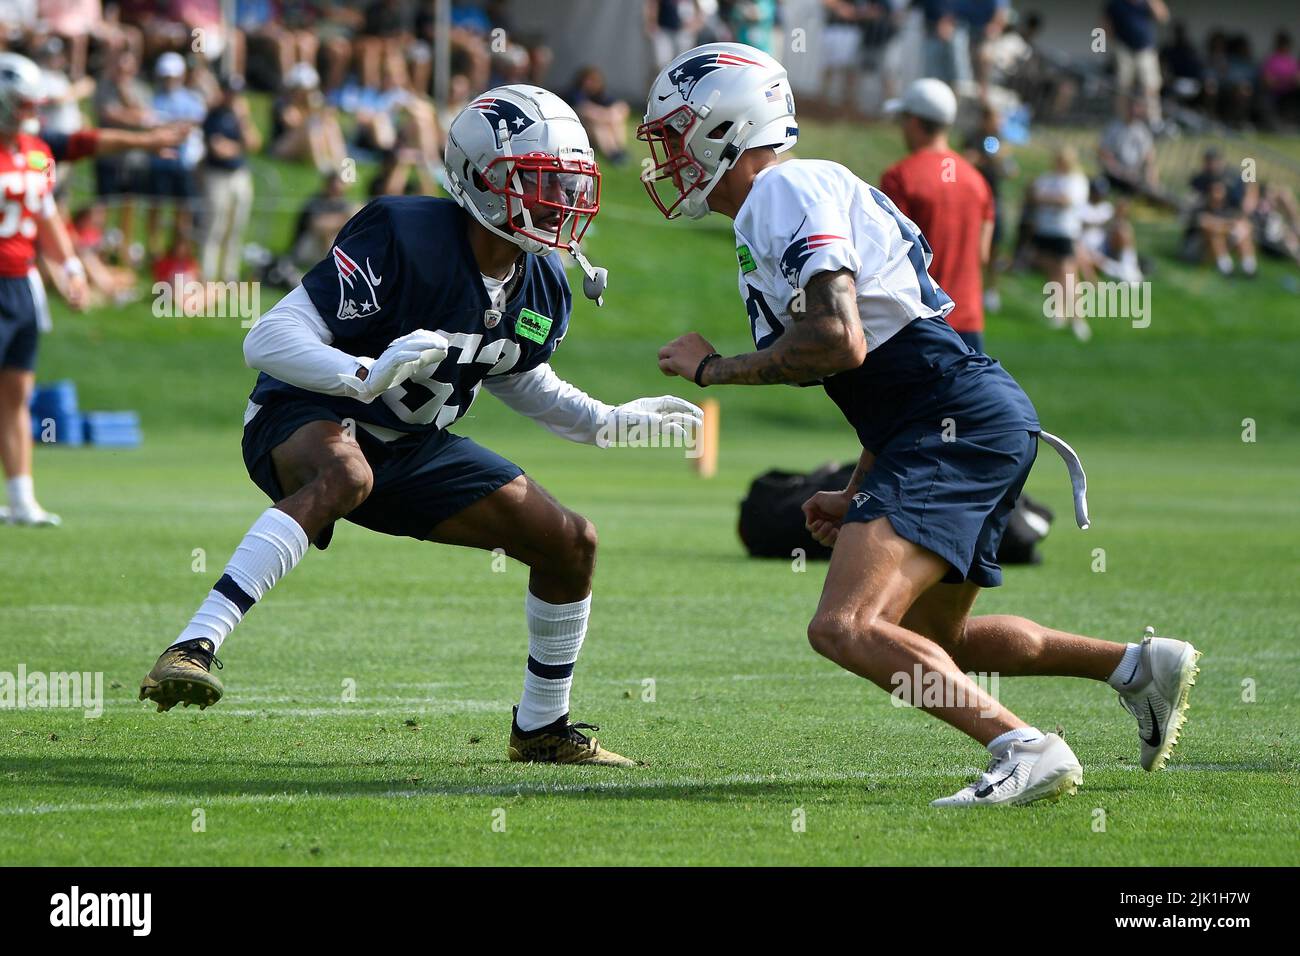 July 29, 2022; Foxborough, MA, USA; New England Patriots defensive back  Jack Jones (53) covers wide receiver Tre Nixon (82) at the Patriots  training camp held on the practice fields at Gillette